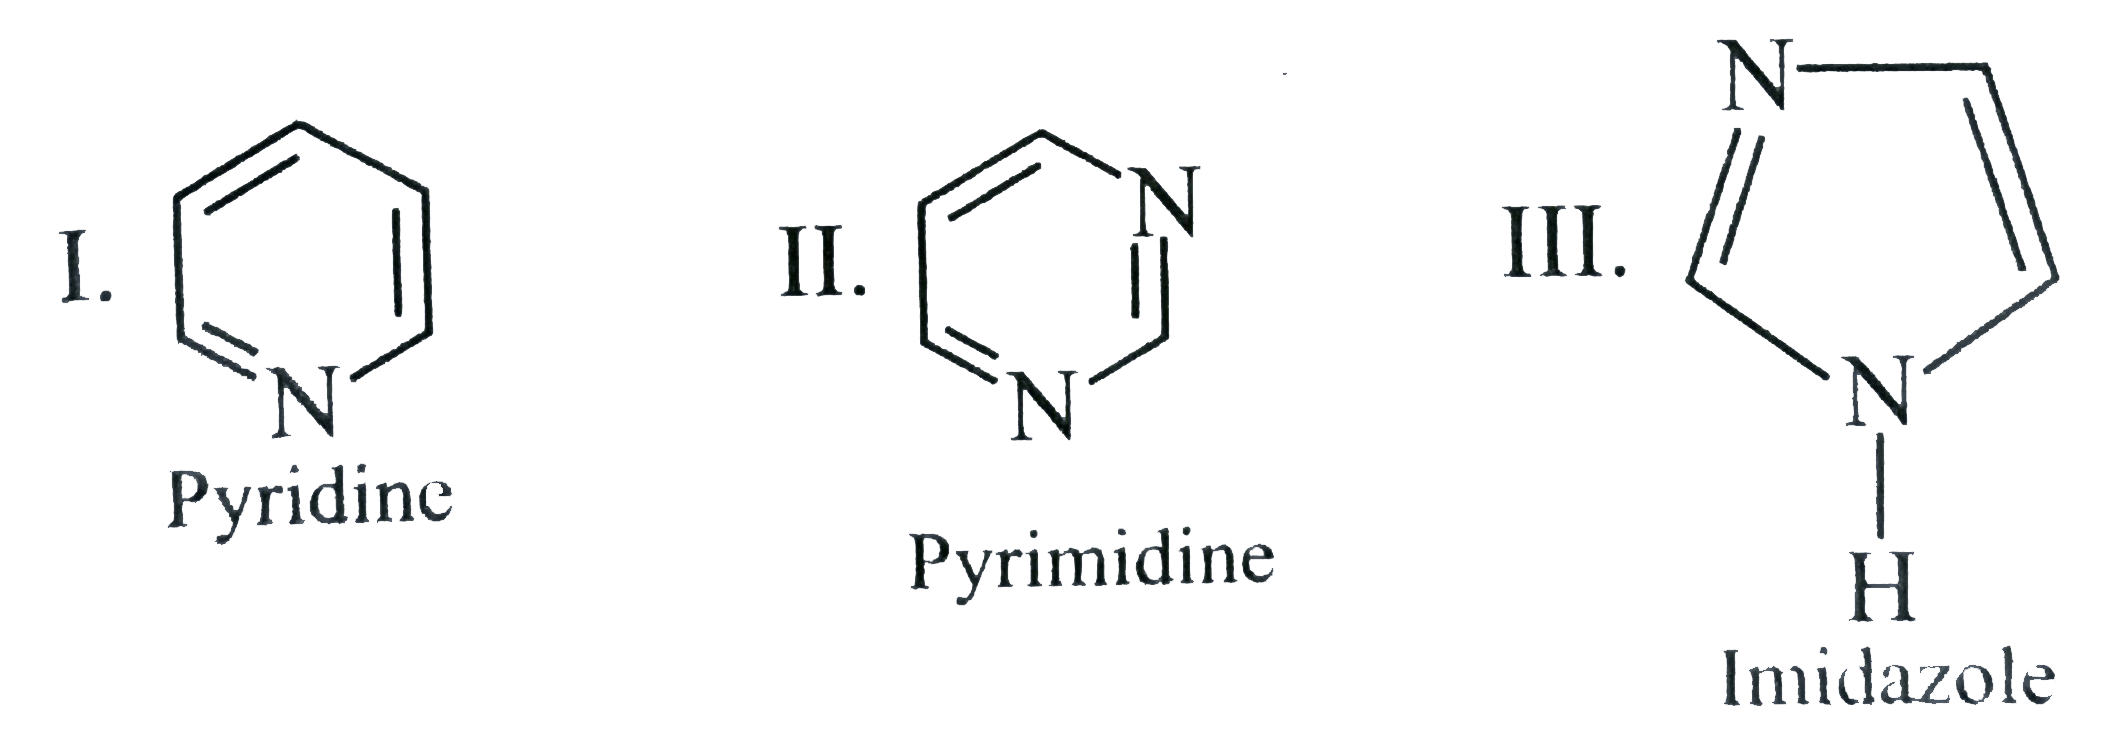 Three heterocyclic amines are shown below I= pyridine,   II= pyrimidine, III= imidazole. What is the order of increasing? (weaker lt stronger base)